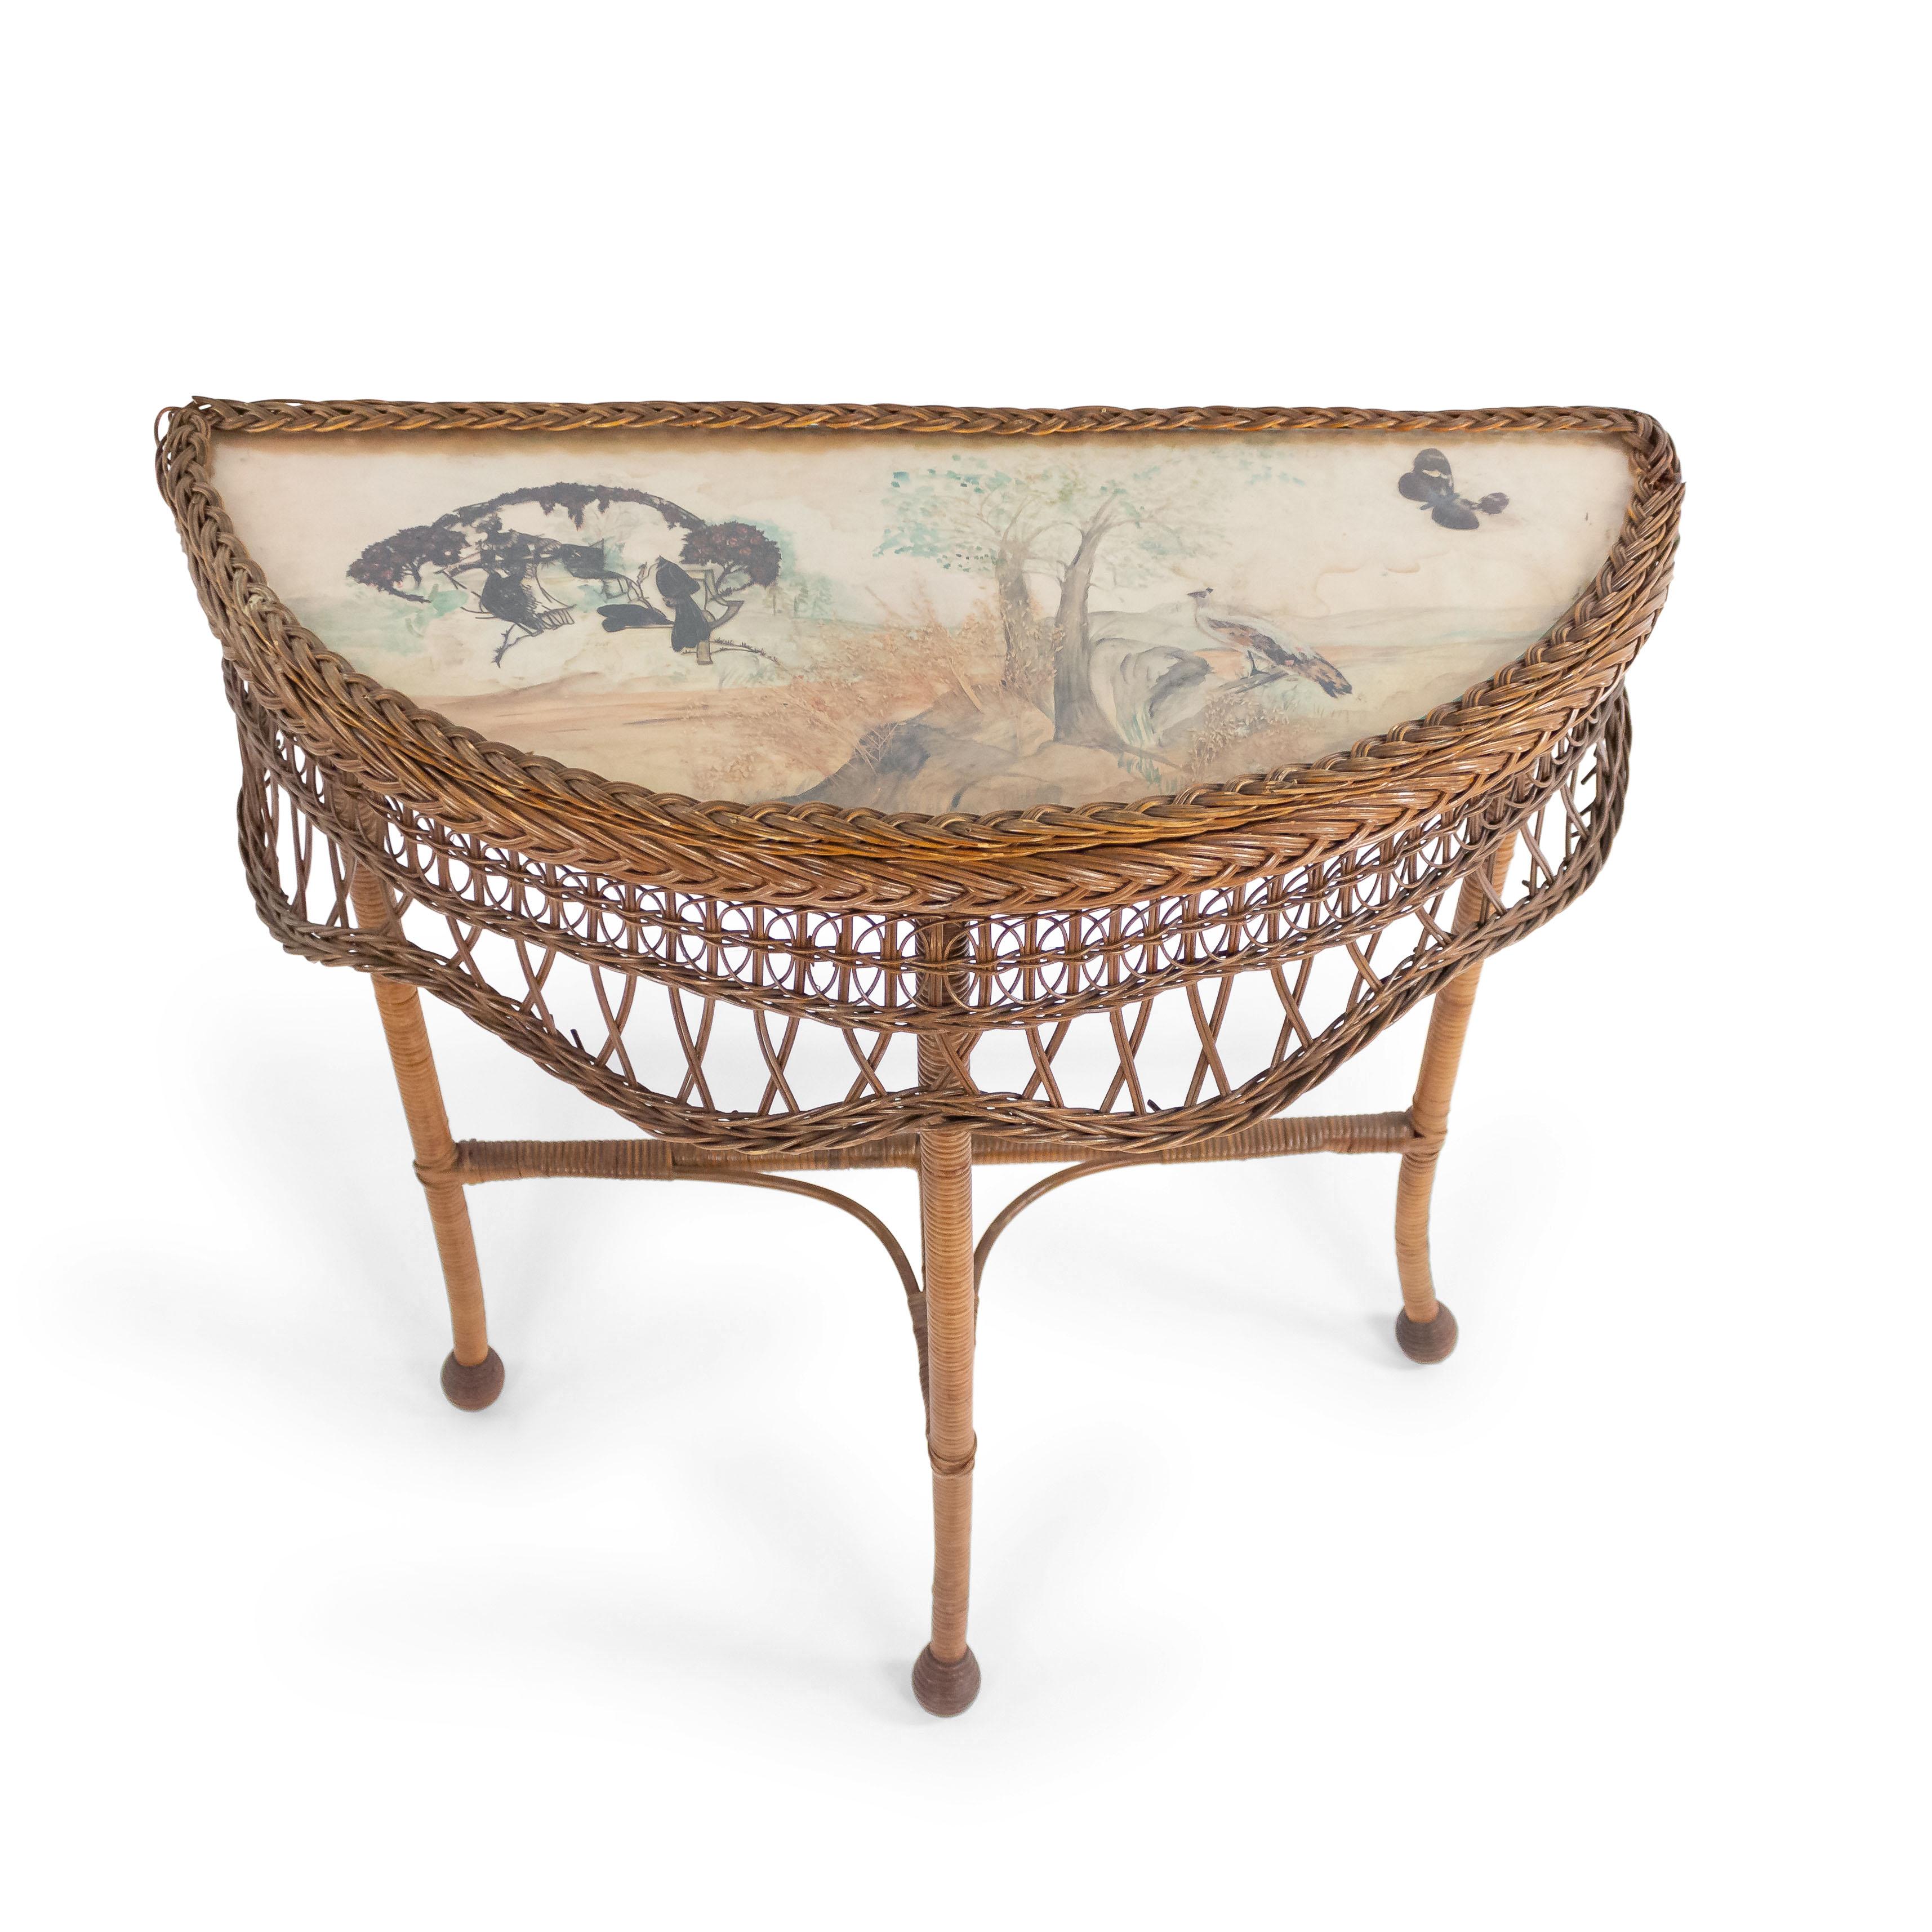  American natural wicker demi-lune 19th century console table with a filigree apron and decorated top with butterflies and feather work under glass.

